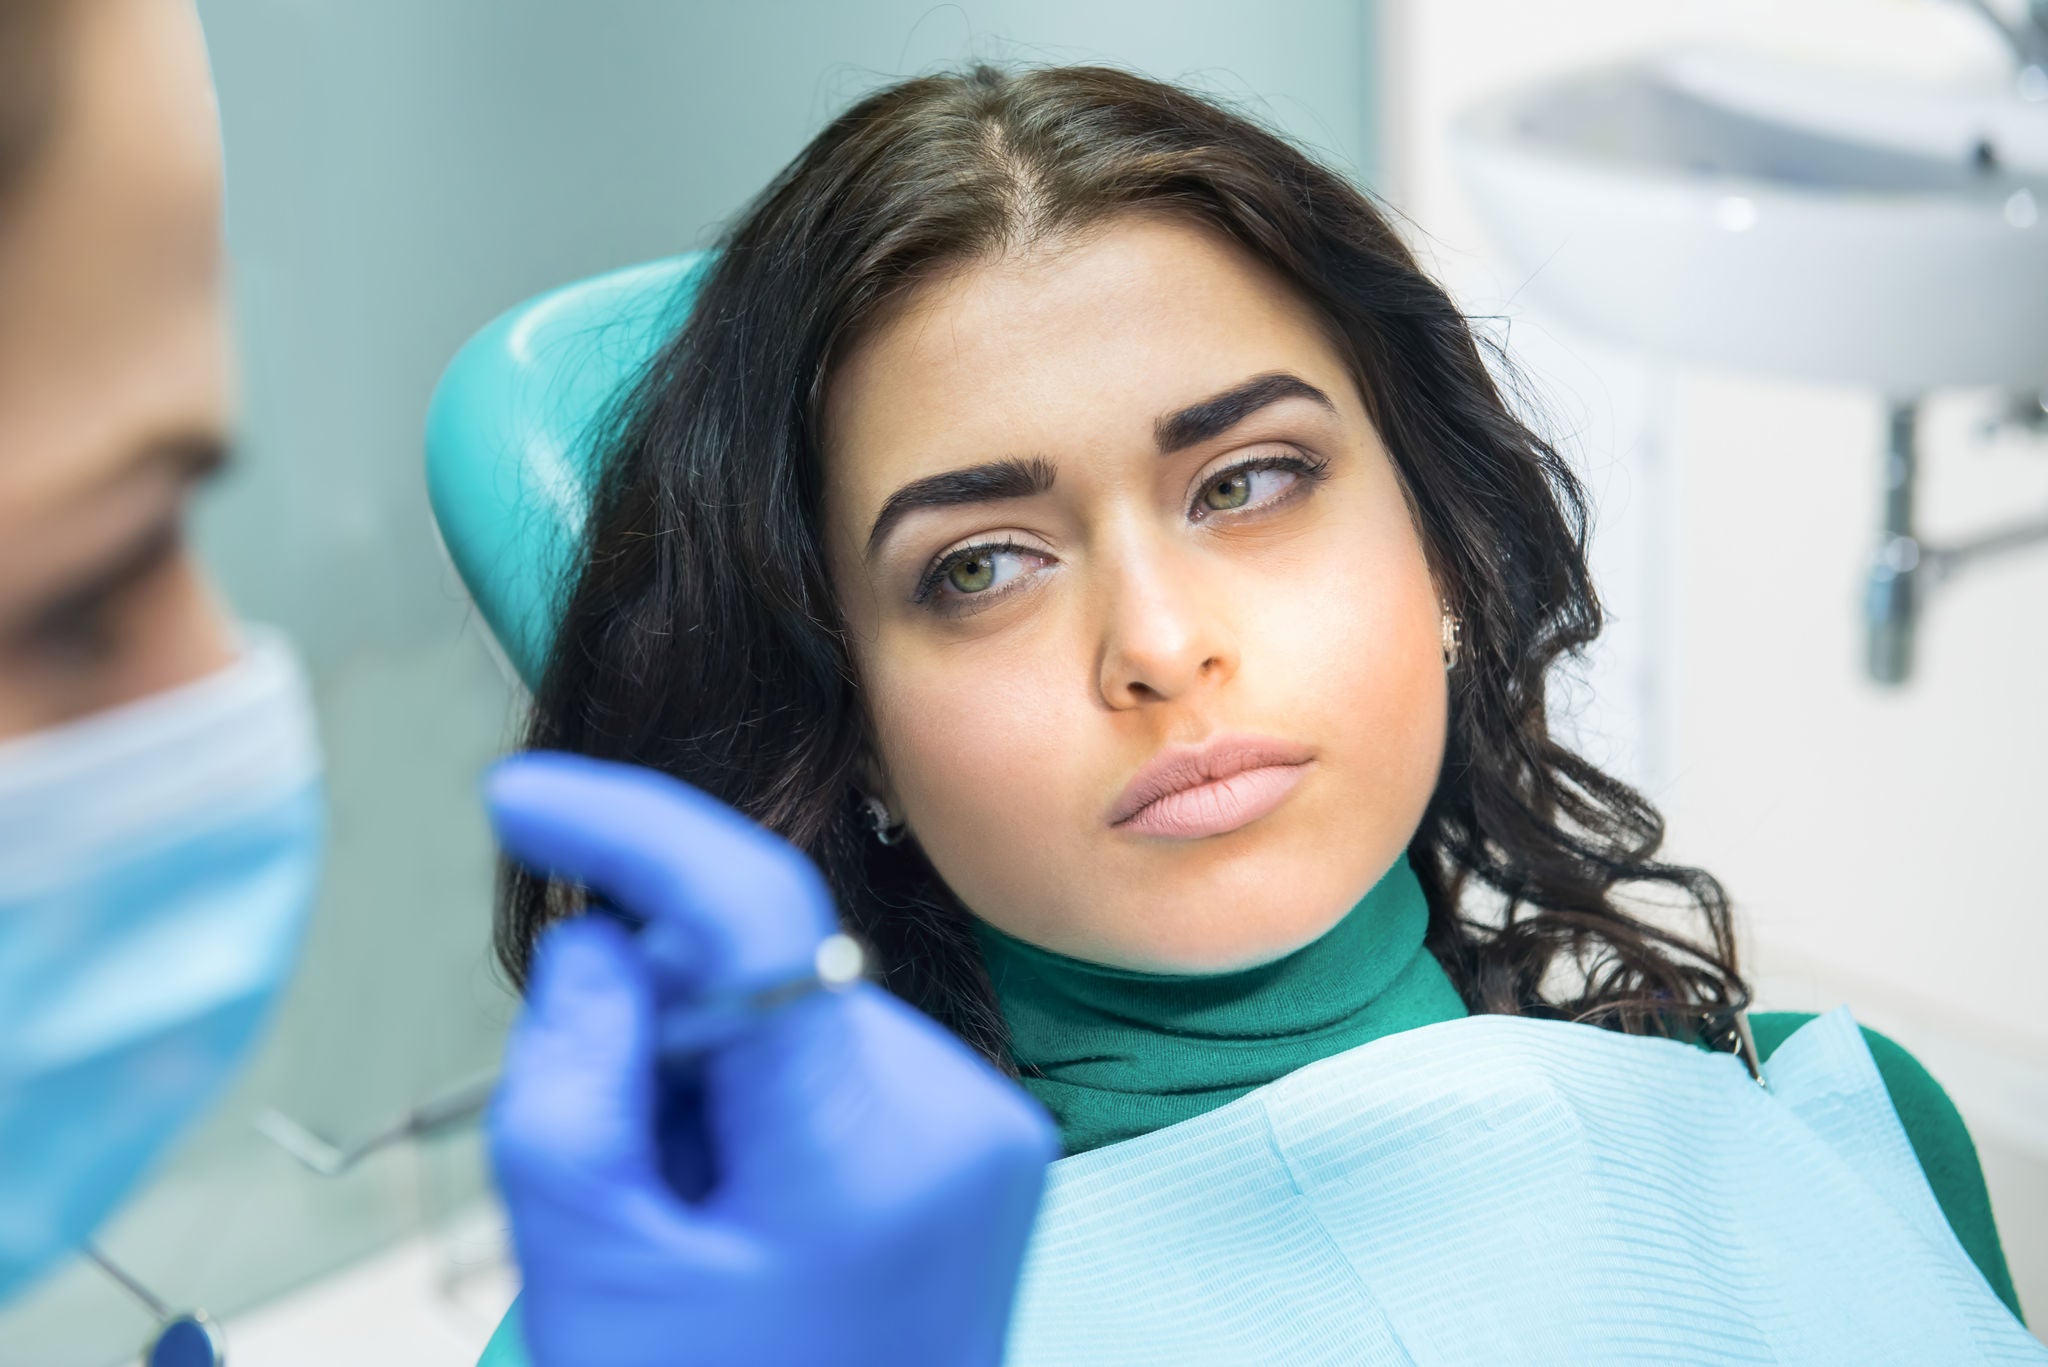 Woman-with-a-serious-face-listening-her-dentist